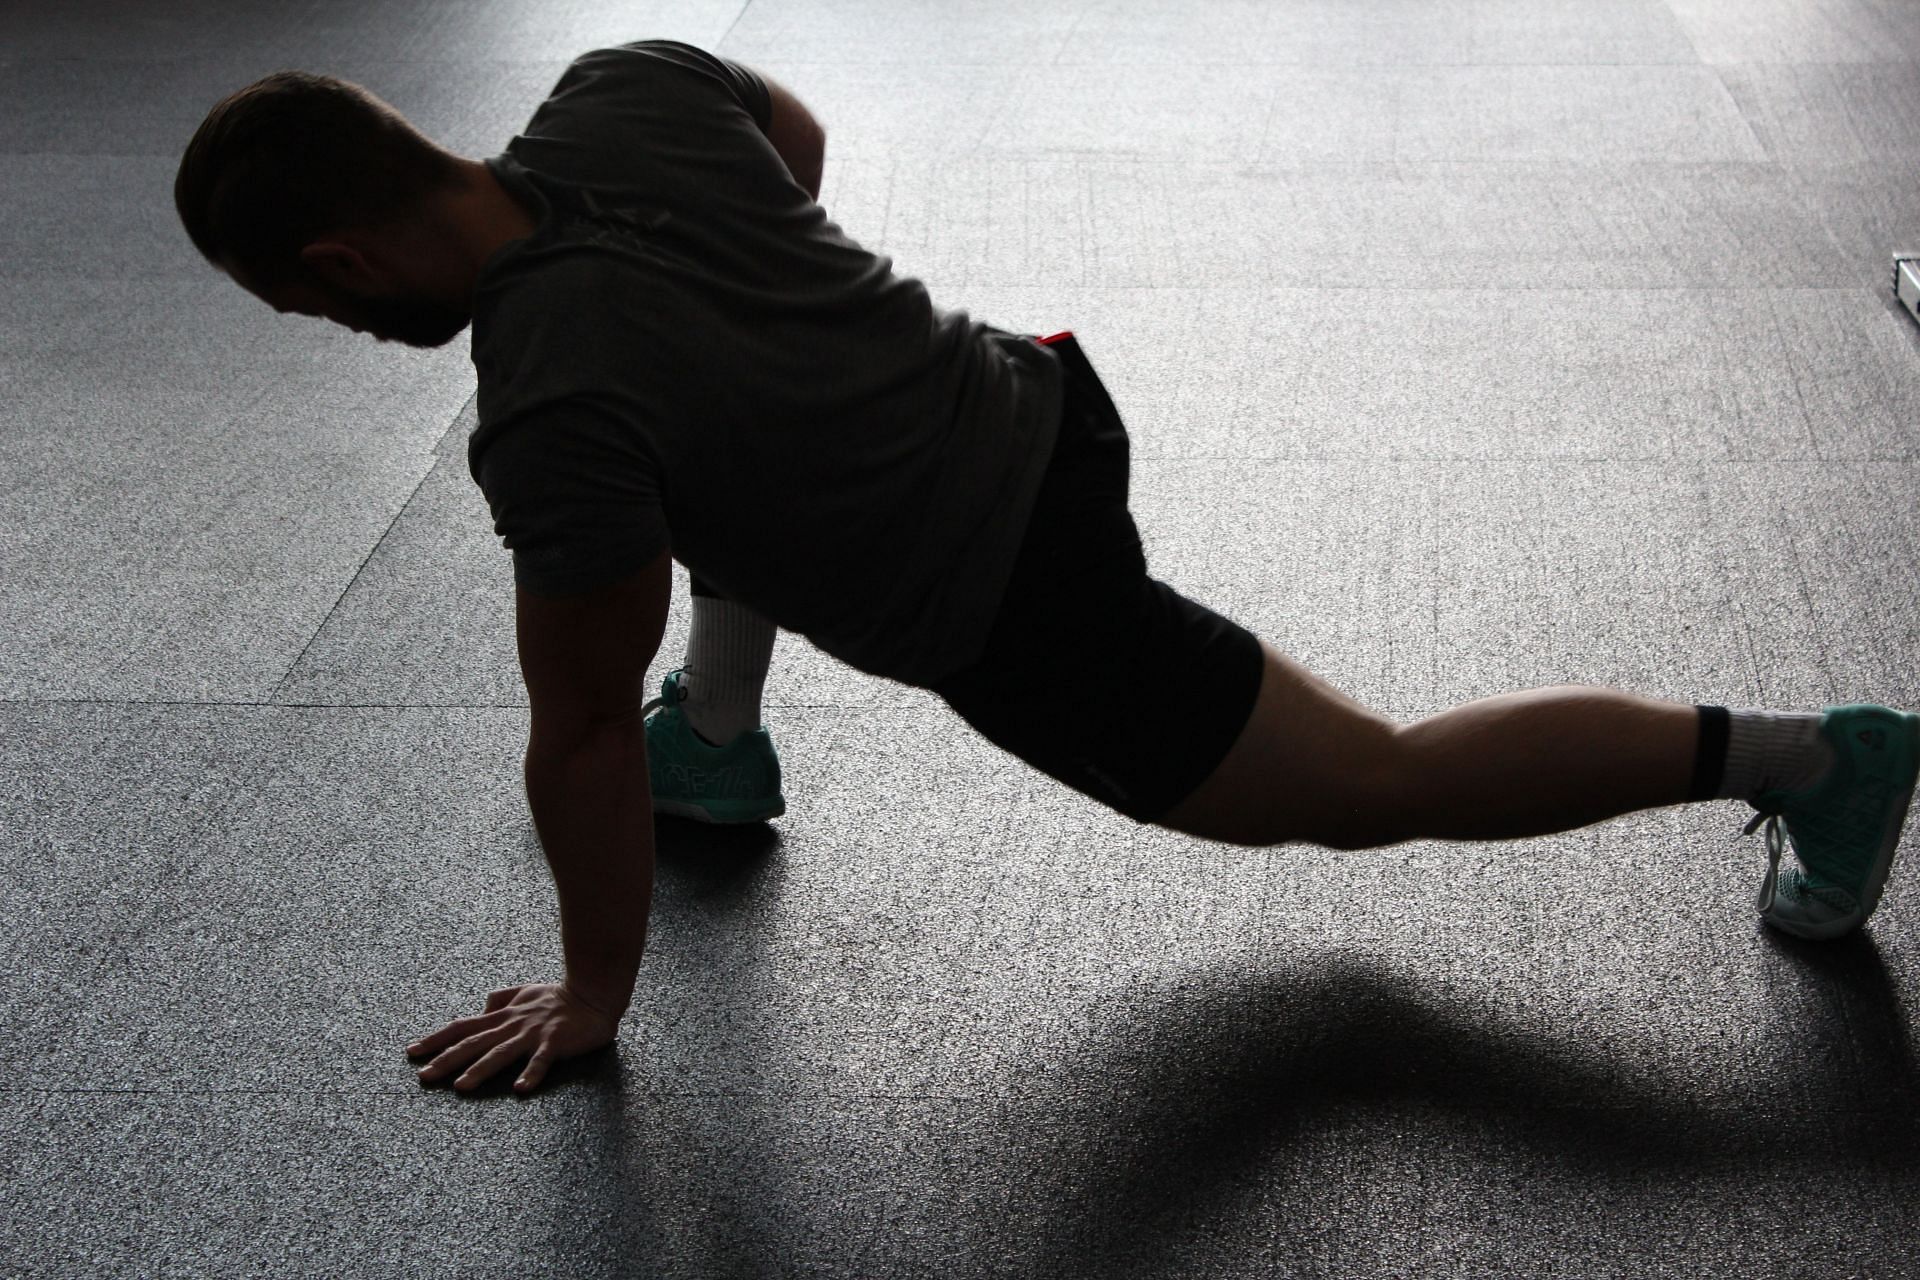 This stretch helps in increasing athletic performance. (Image via Pexels/ Pixabay)